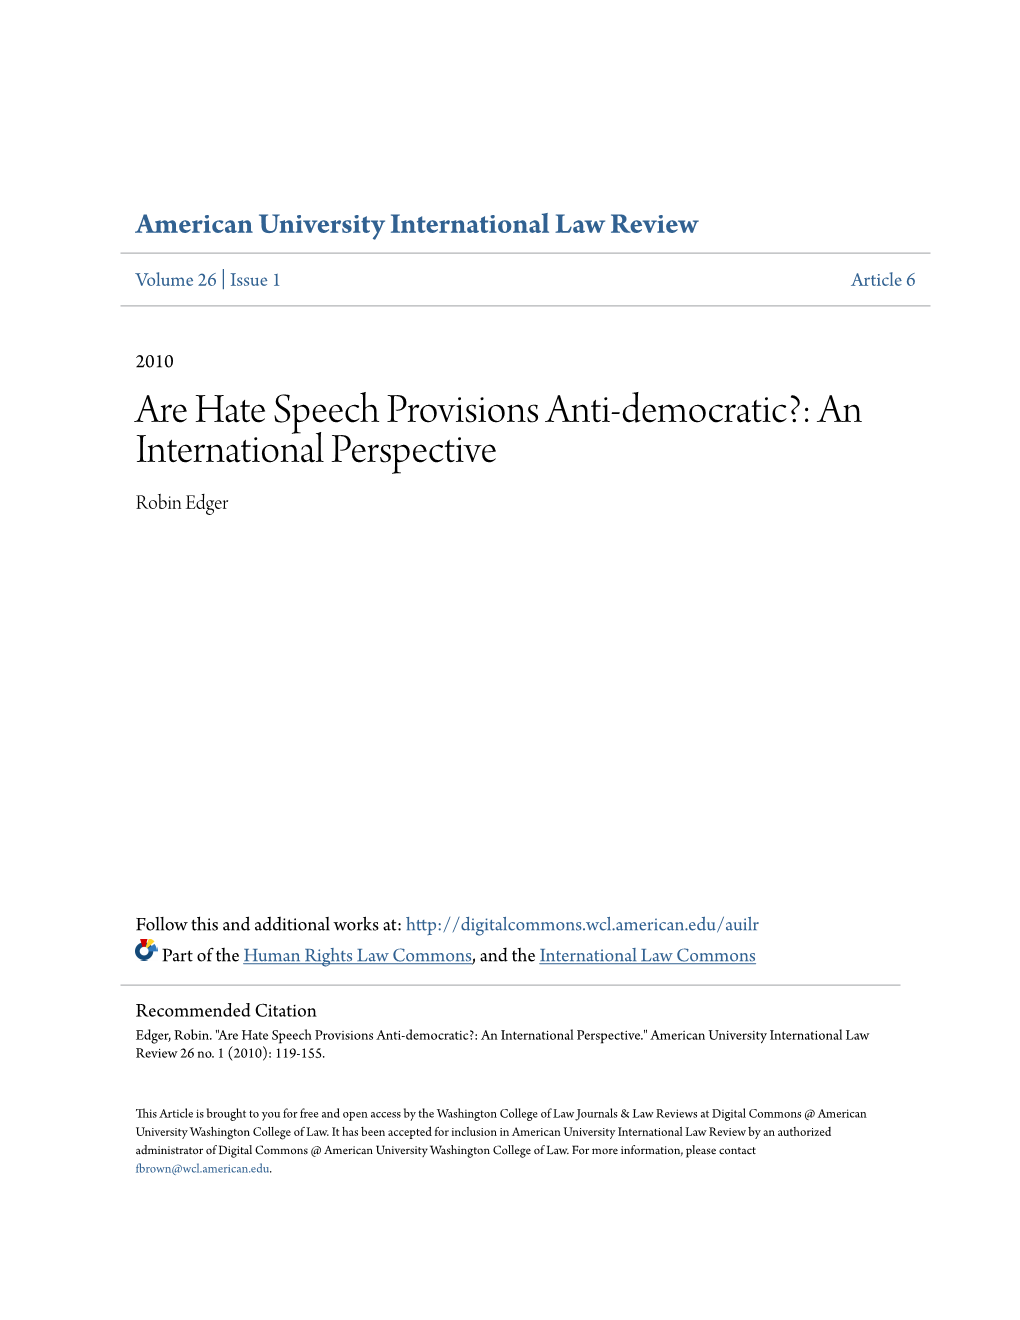 Are Hate Speech Provisions Anti-Democratic?: an International Perspective Robin Edger